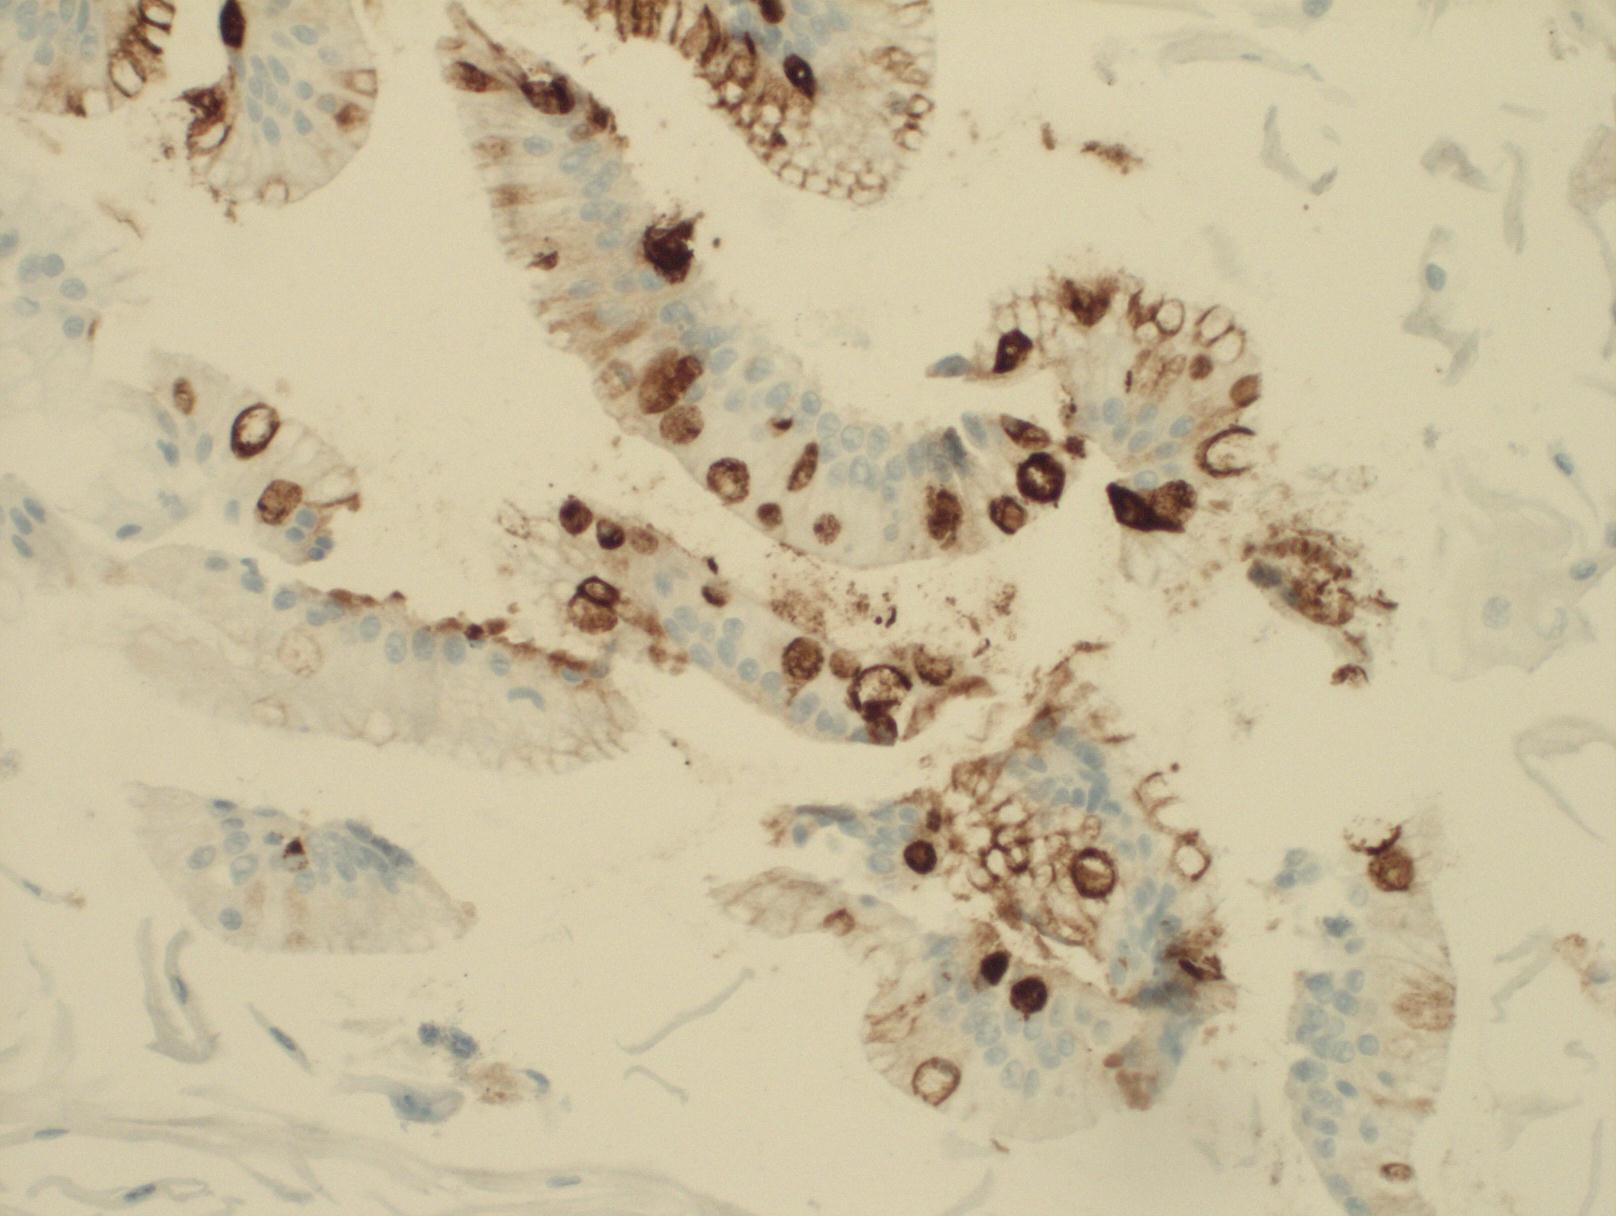 Cells collected from the oesophagus - the cells stained brown stain contain the protein TFF3 indicating Barrett's oesophagus